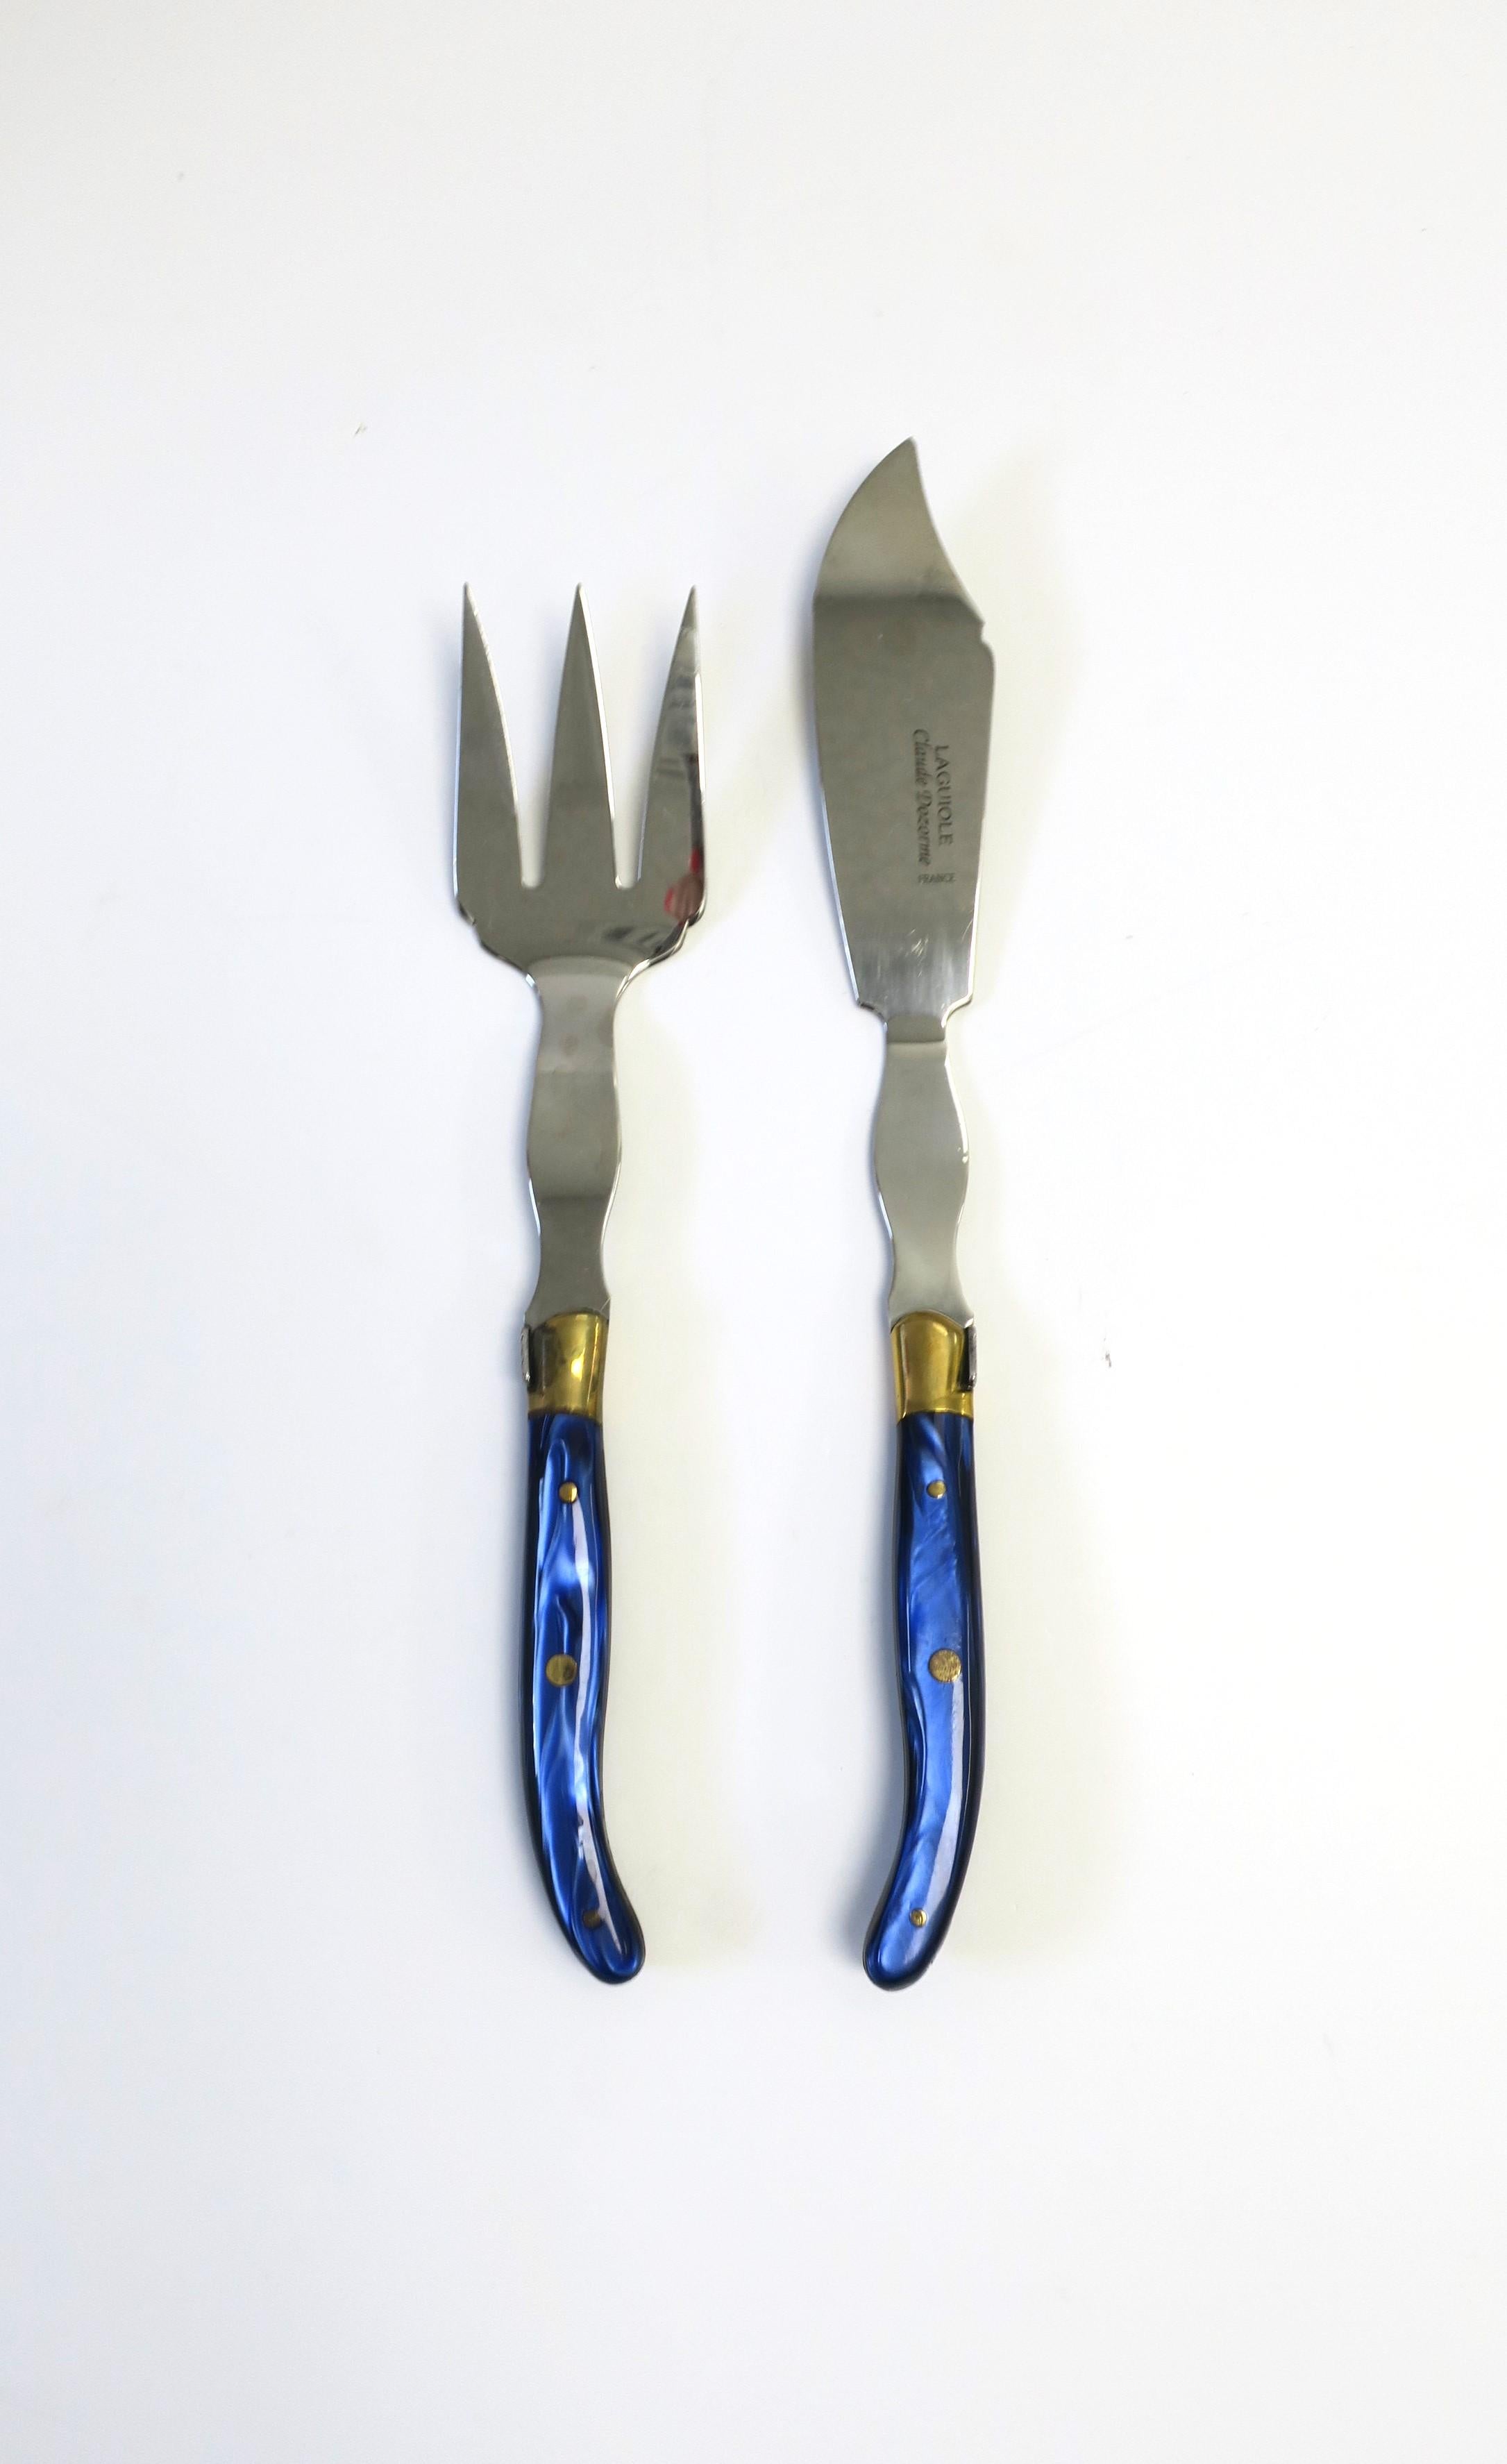 A well-made French fish poisson fork and knife cutlery service set and serving pieces by Claude Dozorme, circa late-20th to early-21st century, France. This set of two (fork, knife) are stainless steel, brass, and finished with resin cobalt blue